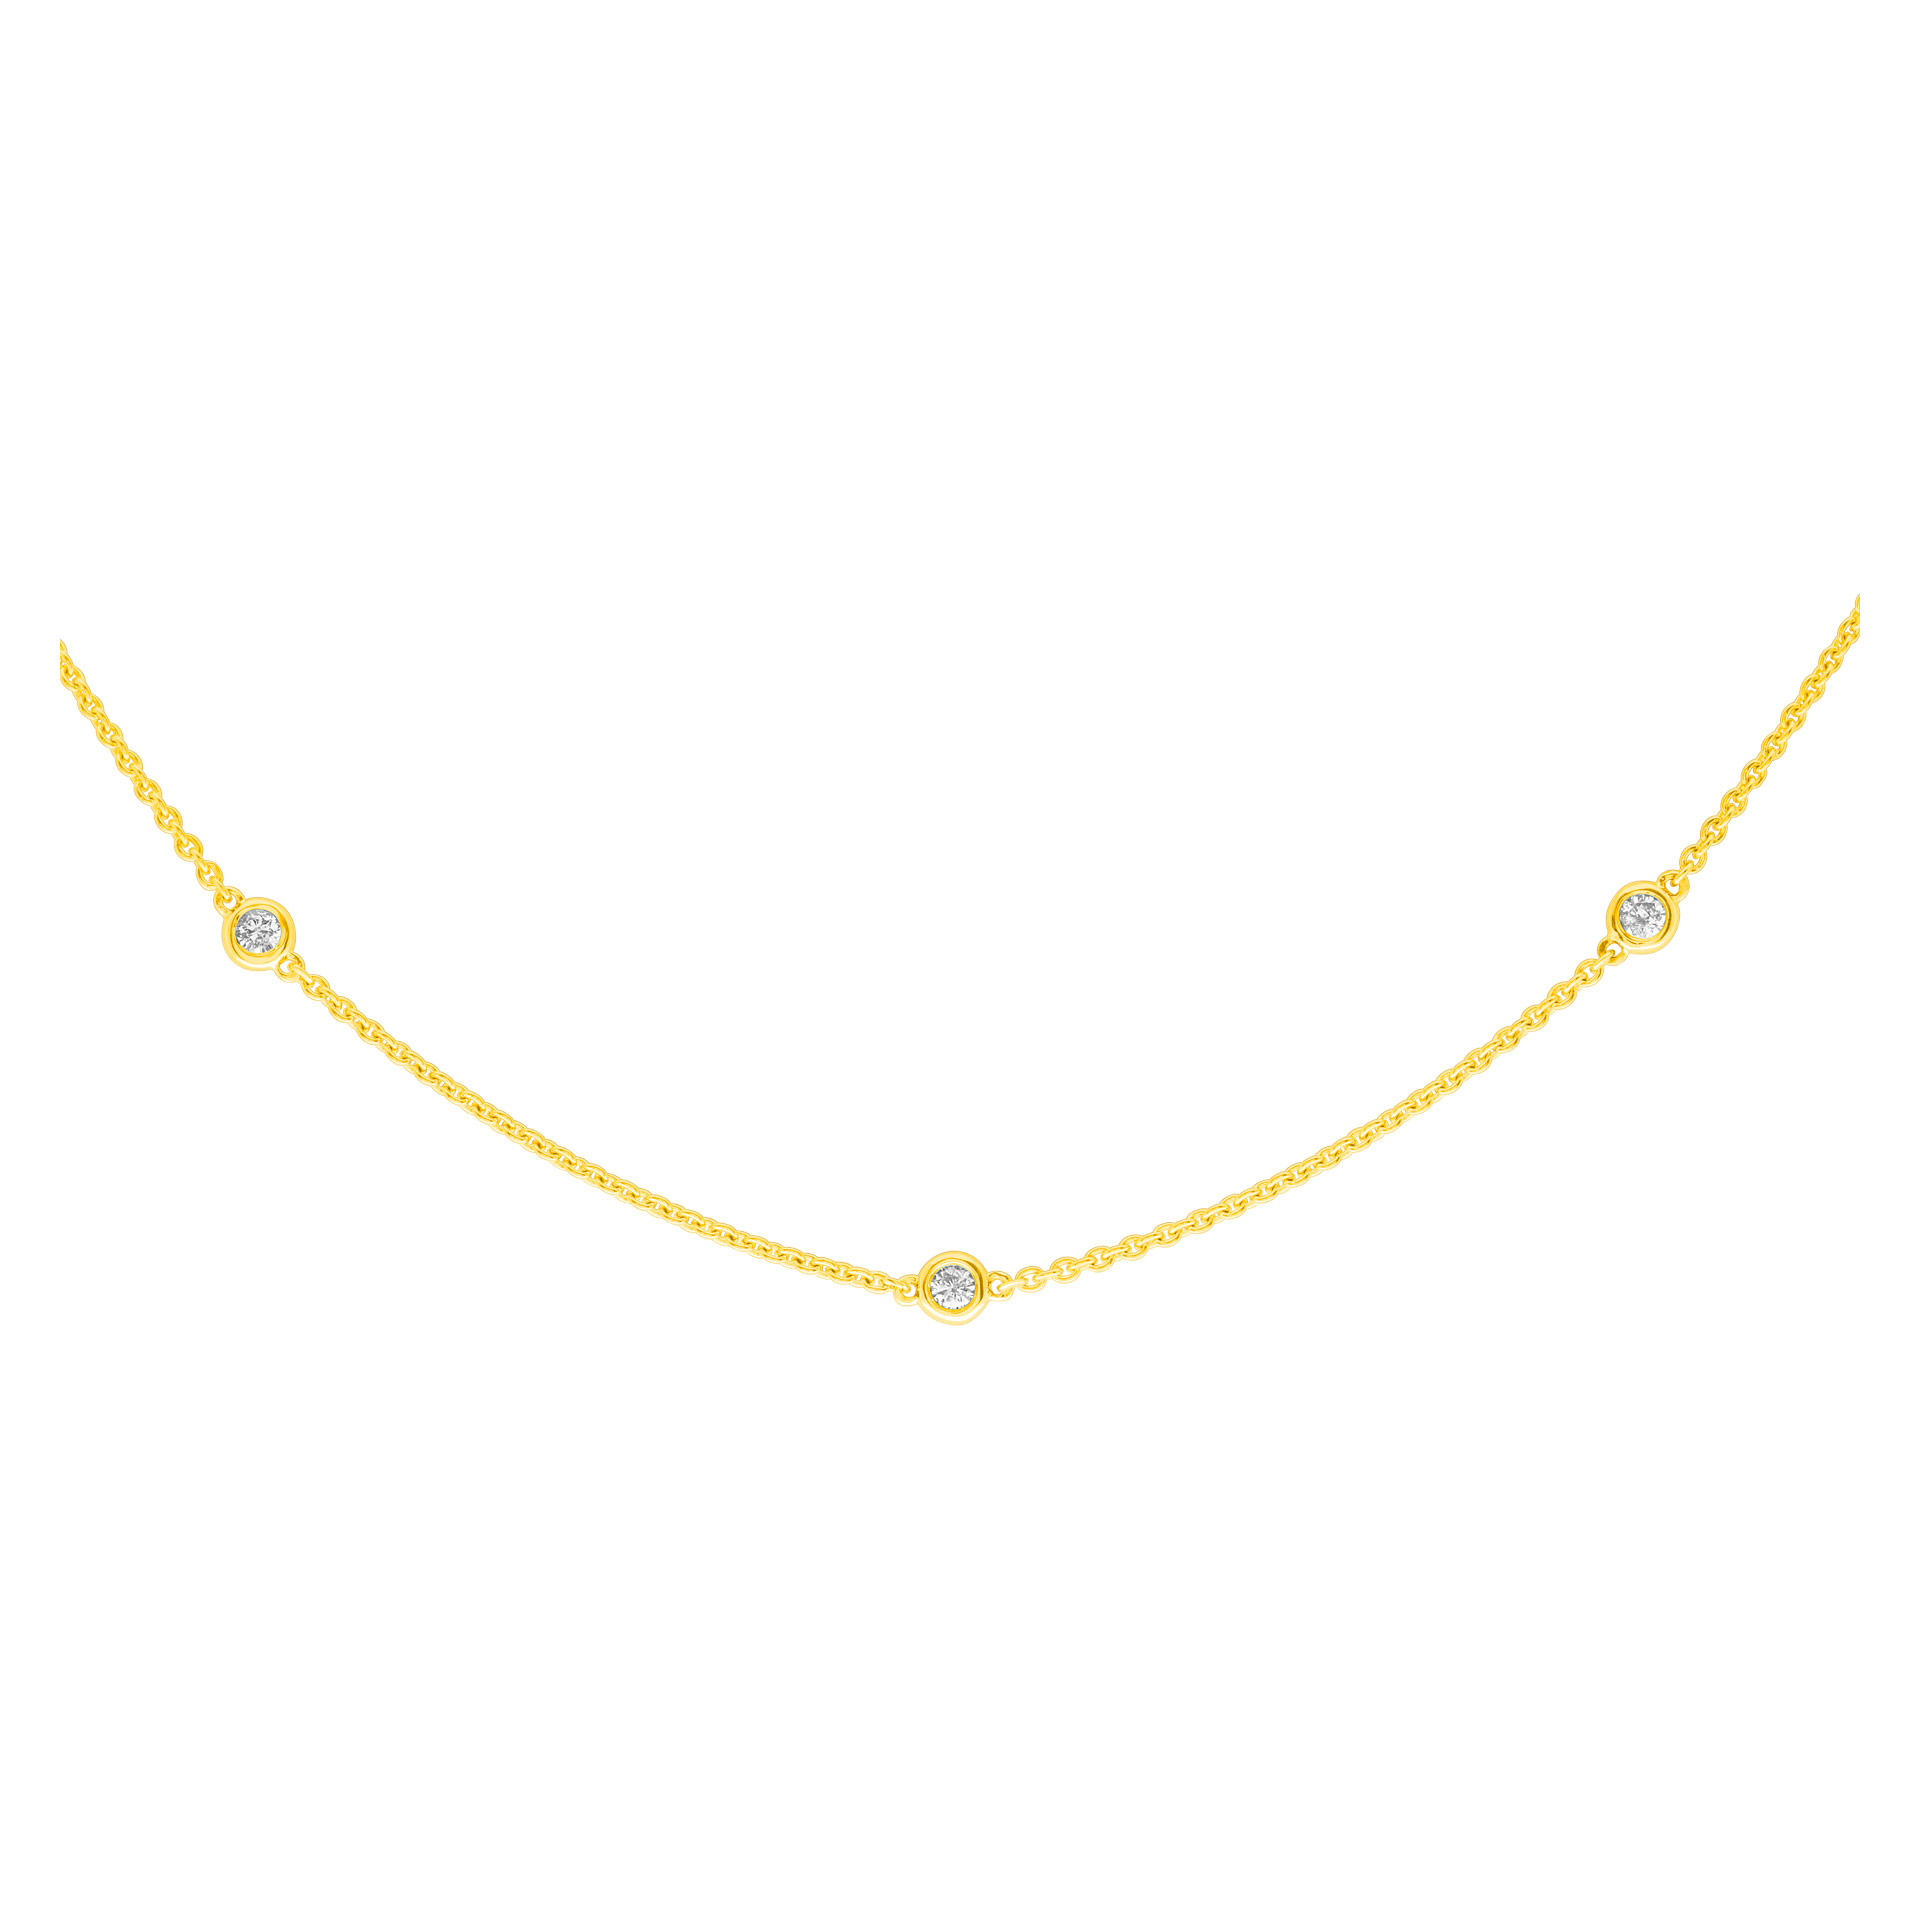 Diamonds by the yard in 14k yellow gold 1.05 ct in diamonds image 1